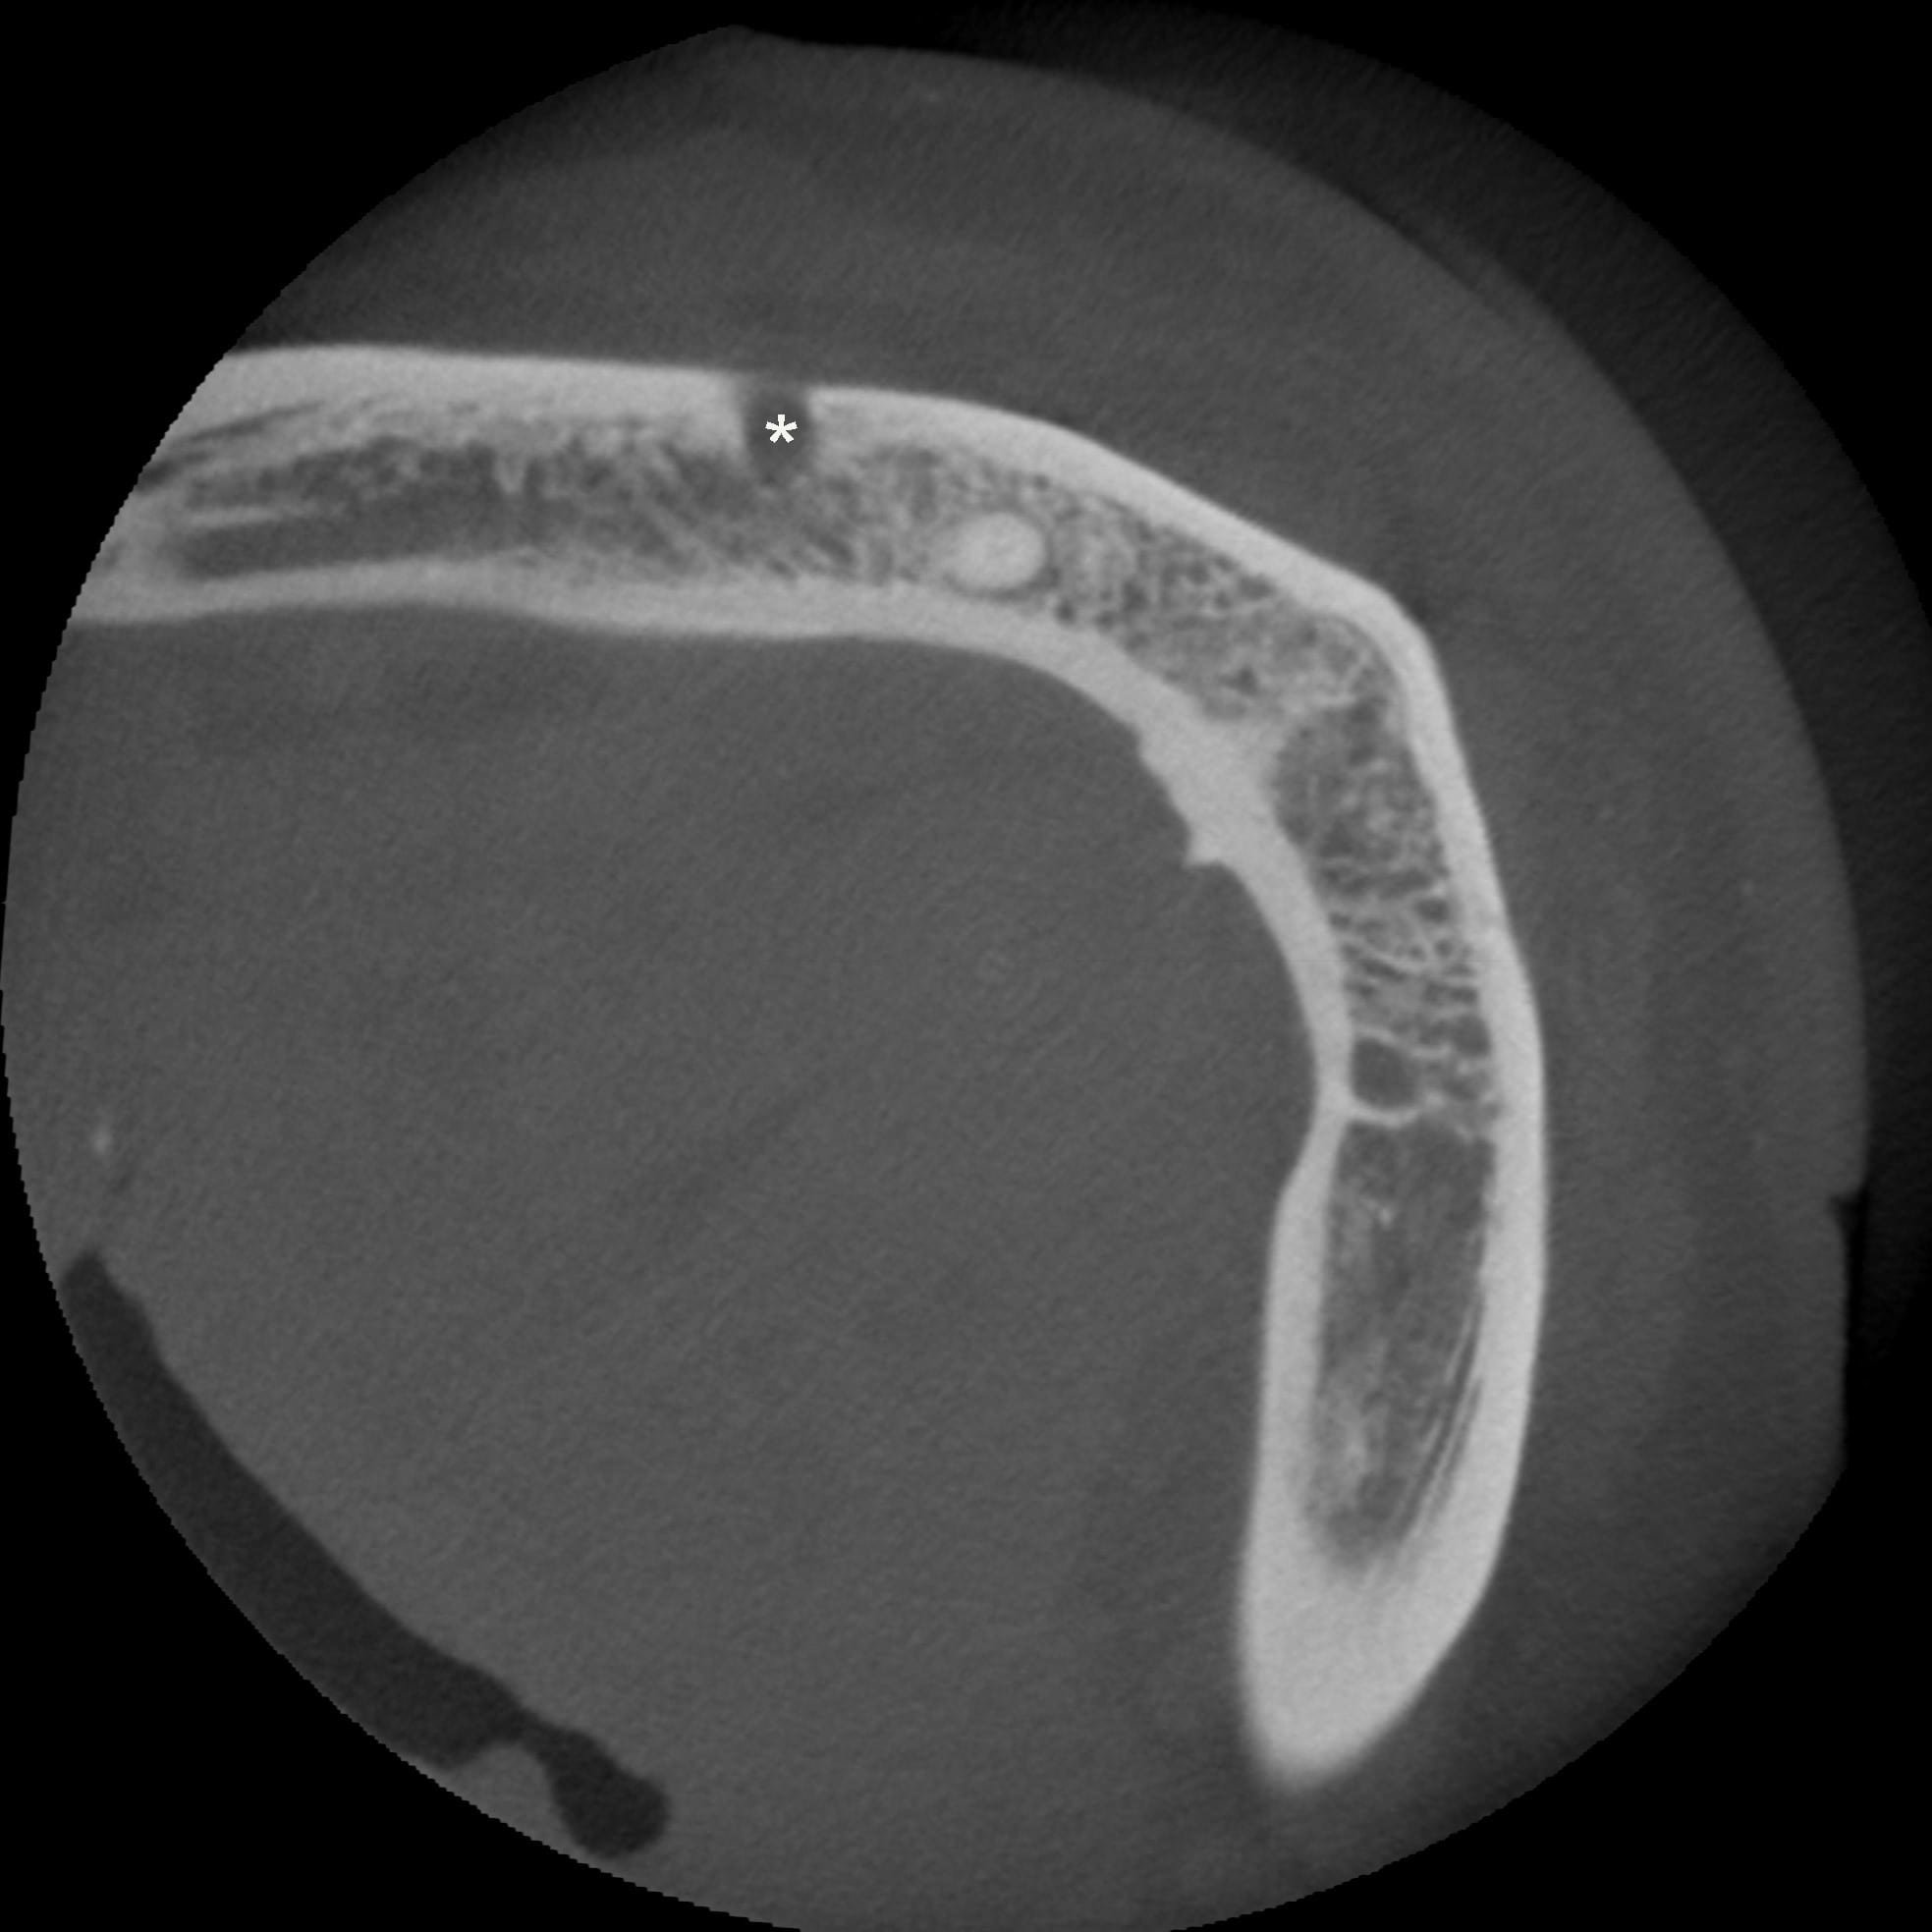 Figure 2F: Axial CBCT image with mental foramen (*)